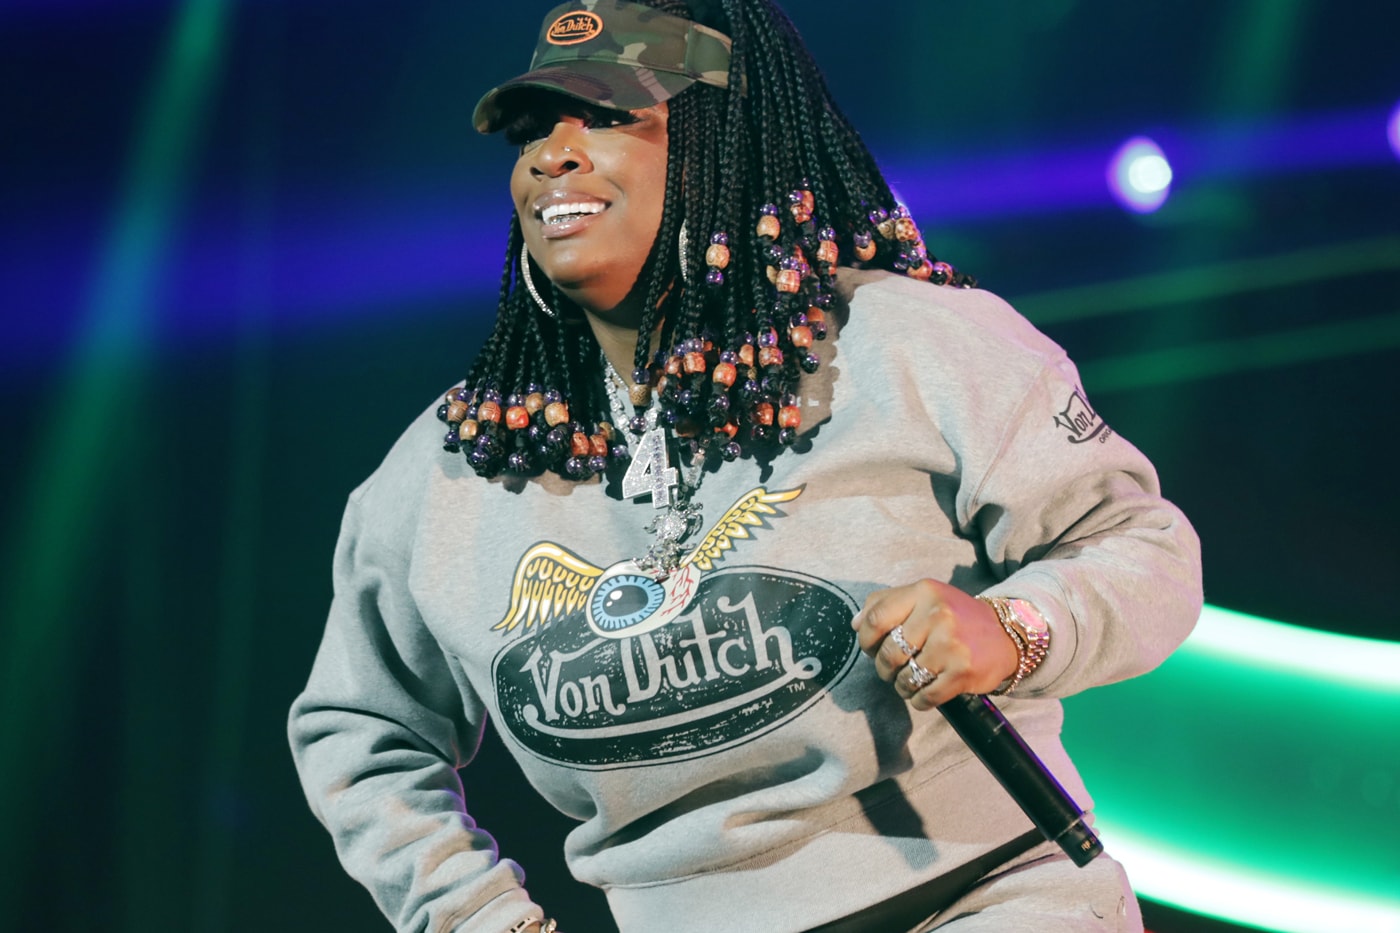 Kamaiyah Album Leak Single Music Video EP Mixtape Download Stream Discography 2018 Live Show Performance Tour Dates Album Review Tracklist Remix Hennessy On Ice Through The Night seasons